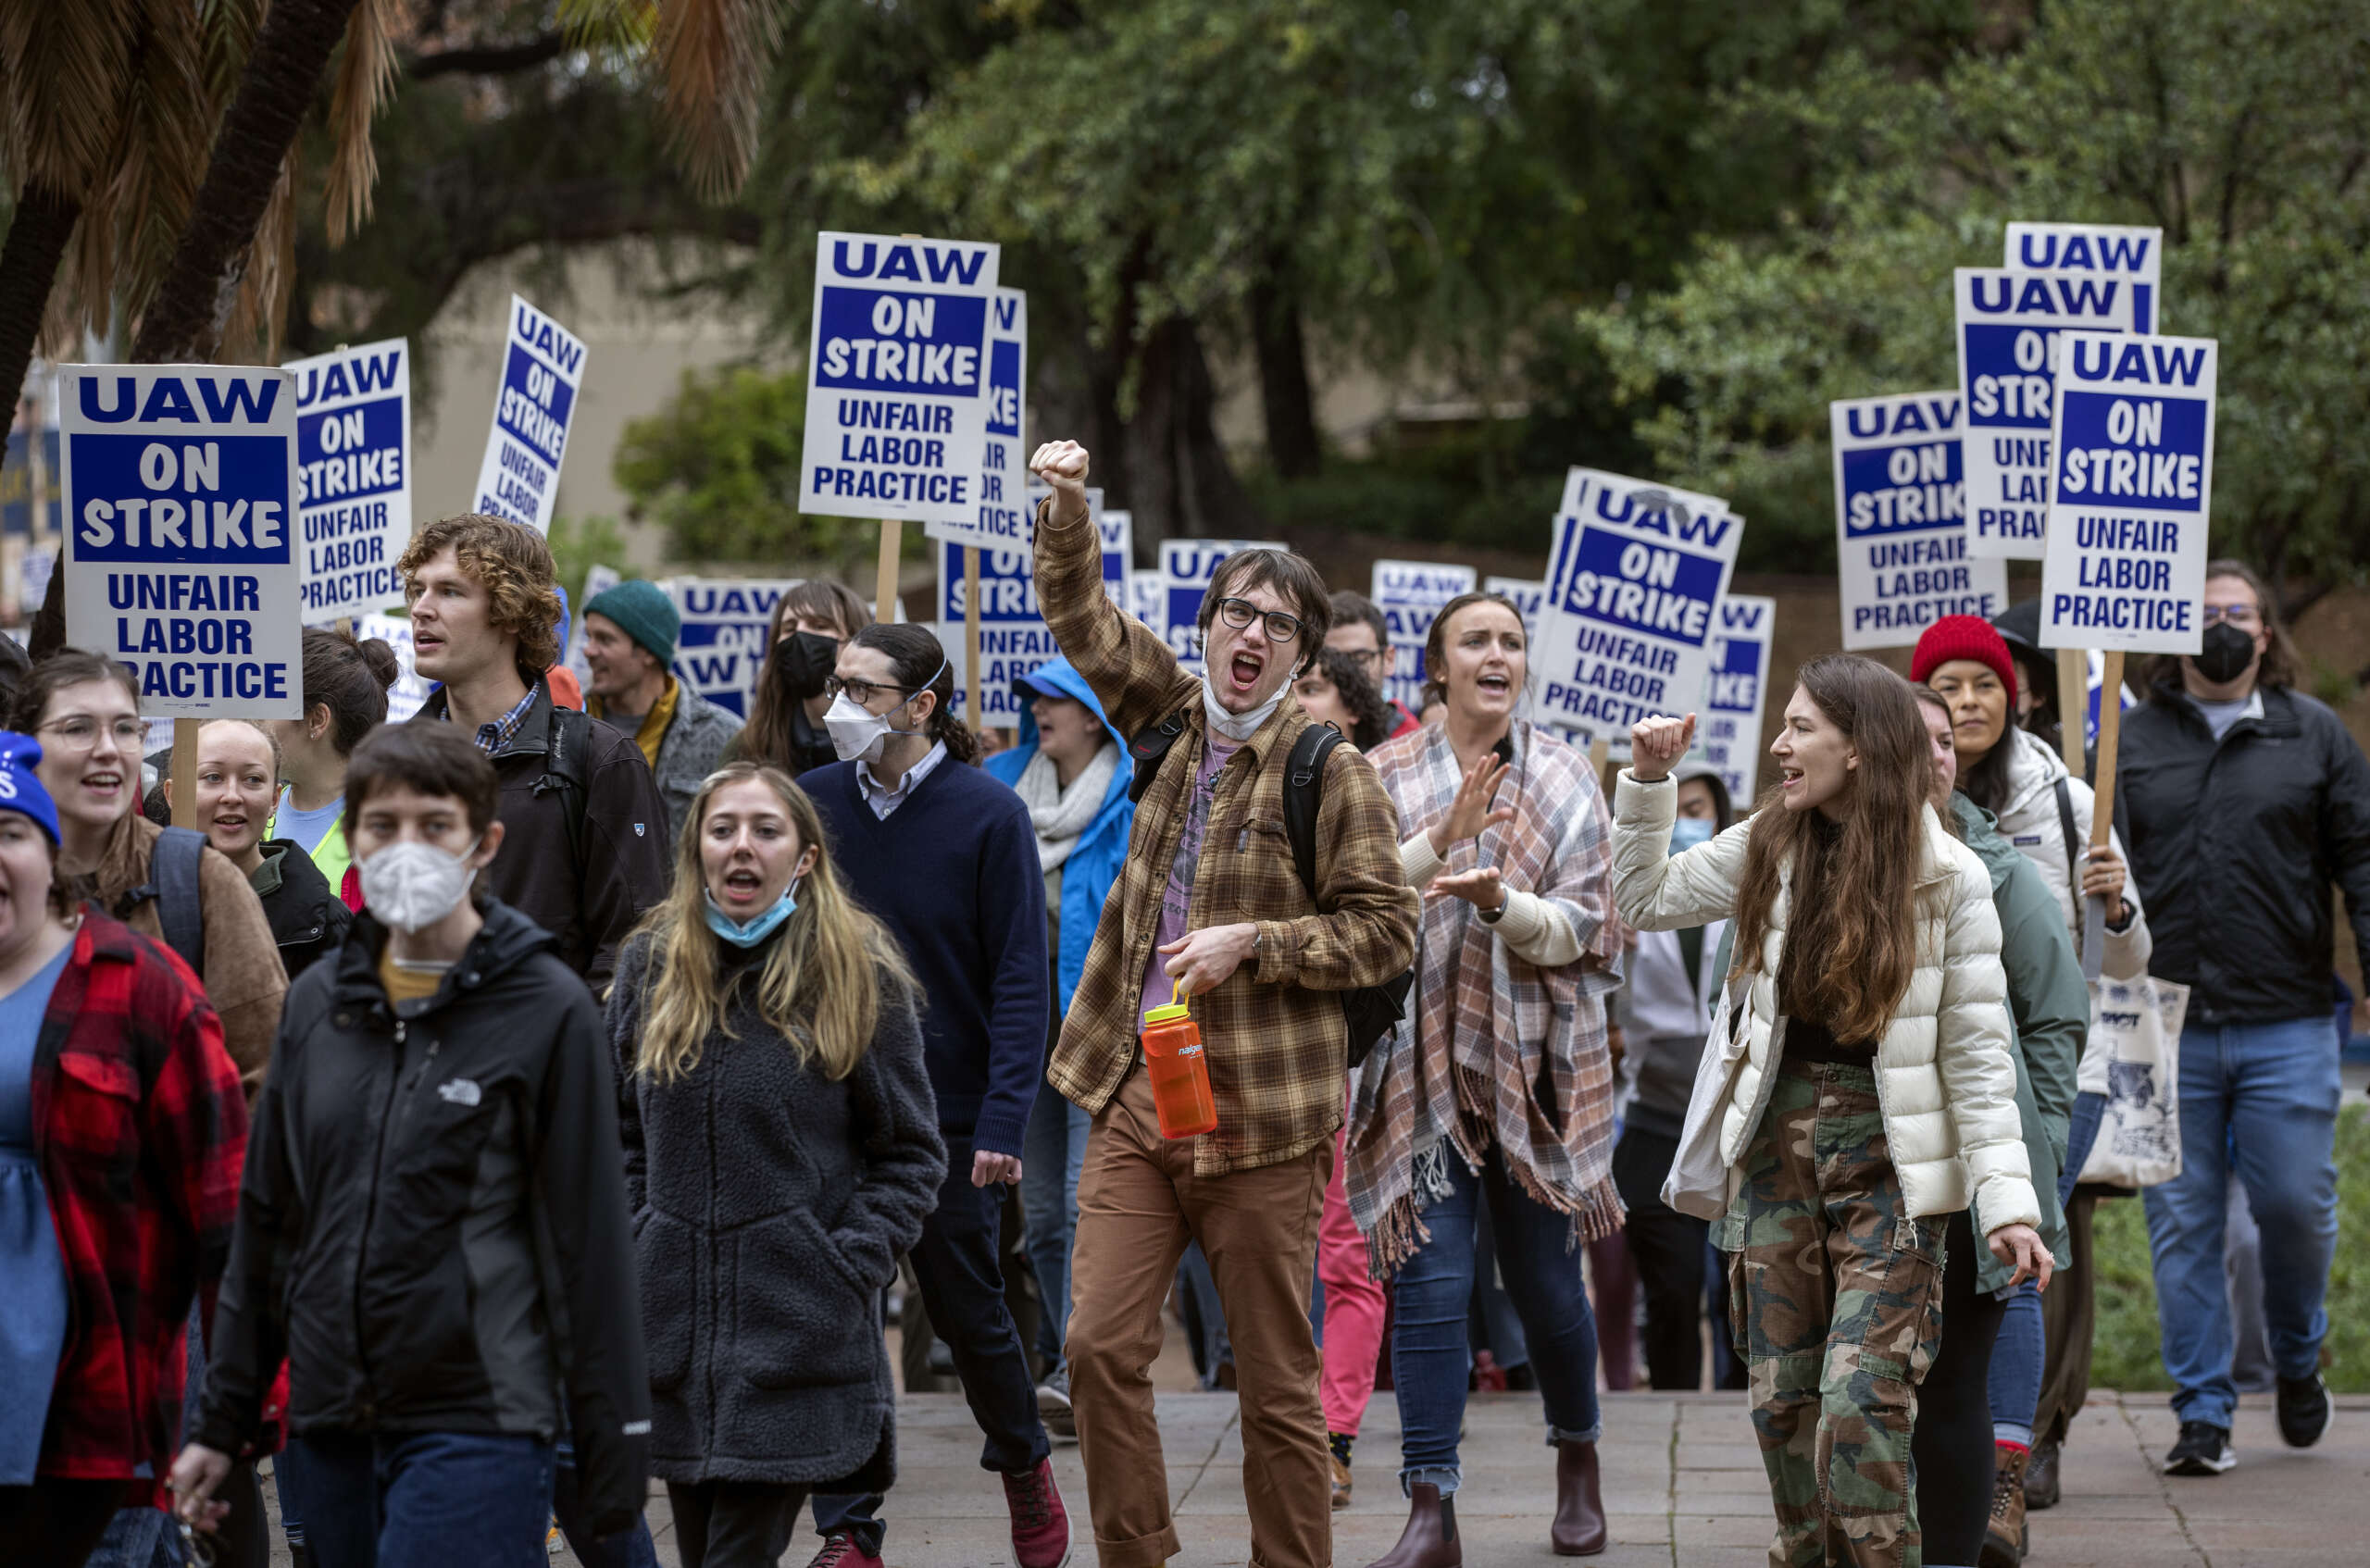 Graduate student workers on strike at UCLA are joined by faculty members as they march together on campus, calling for the university to offer the students a contract with a dramatic increase in pay and benefits to match the skyrocketing cost of living in California, on December 2, 2022, in Los Angeles, California.